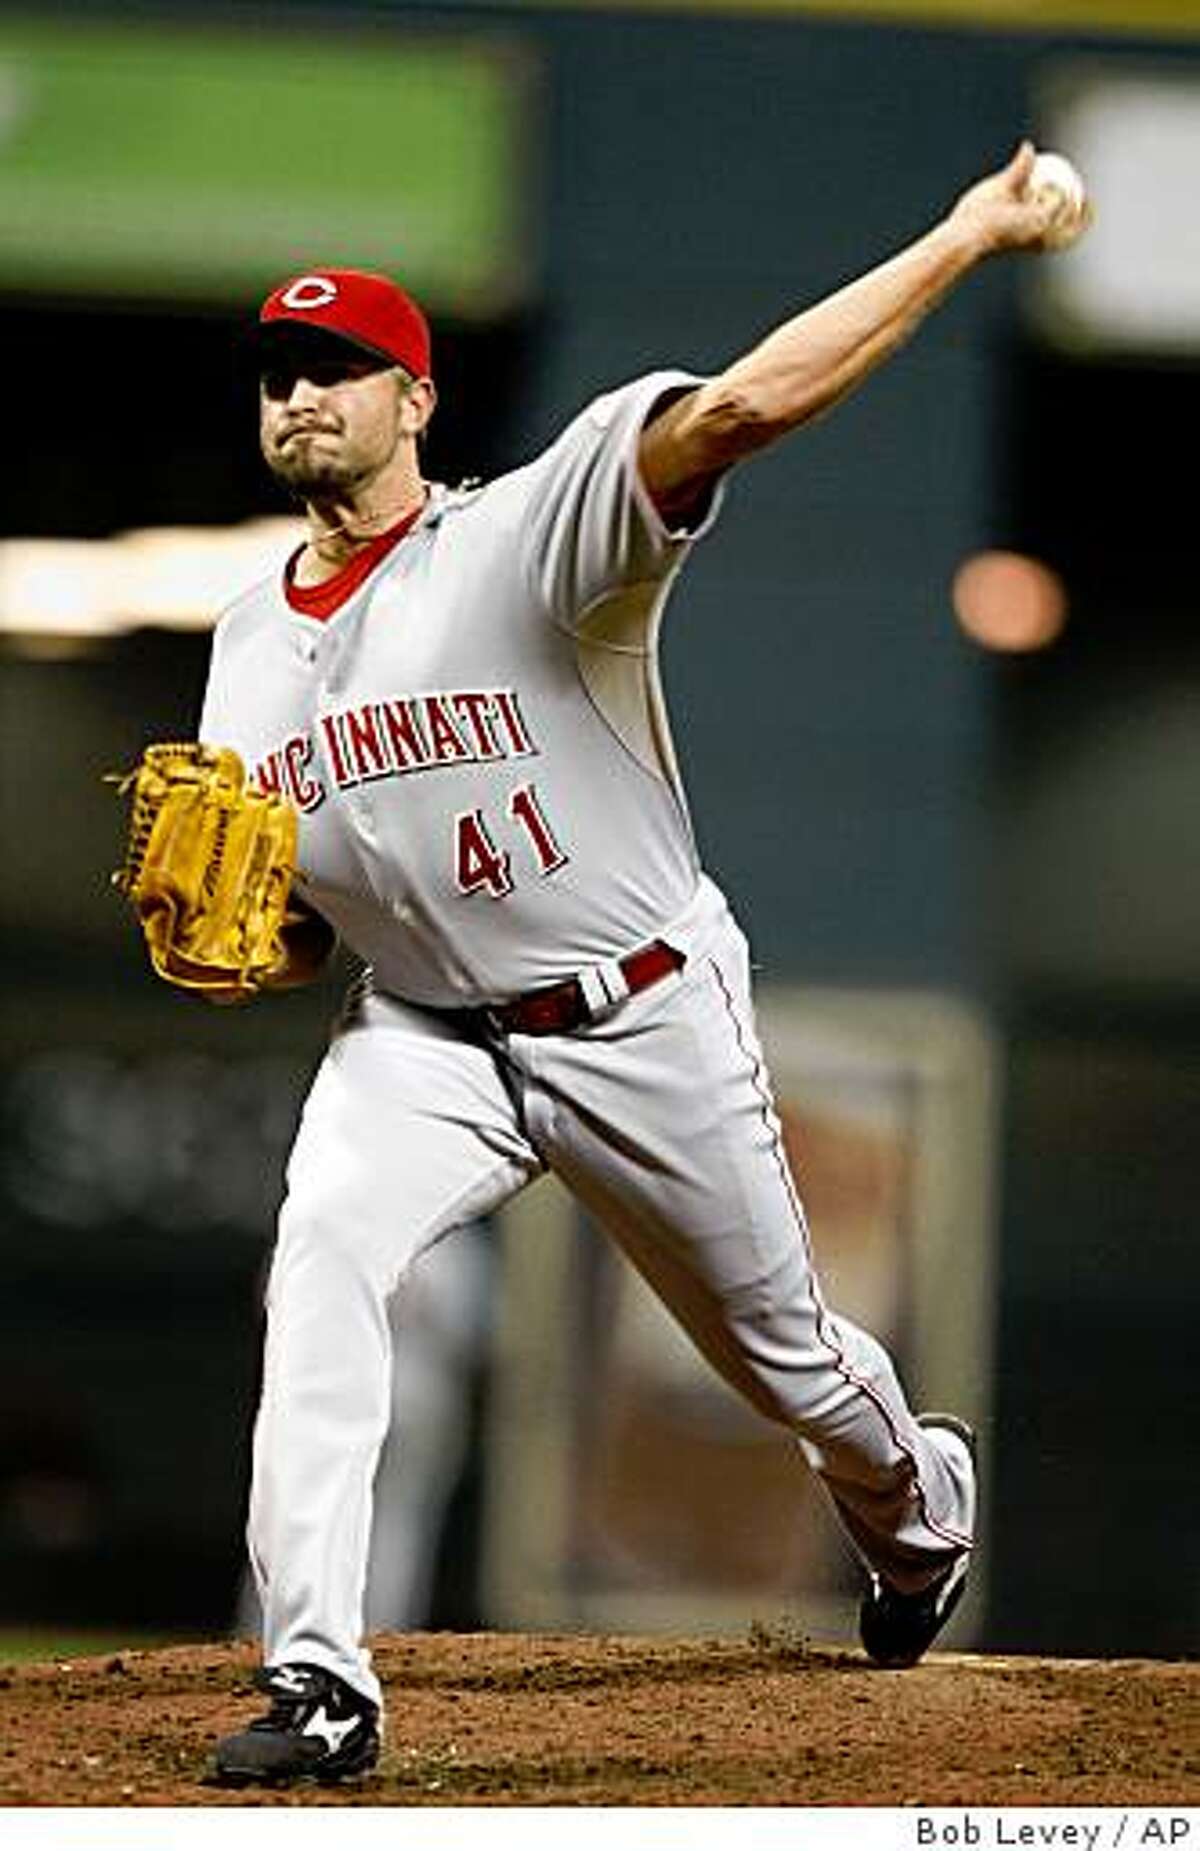 In this Sept. 24, 2008 file photo, Cincinnati Reds relief pitcher Jeremy Affeldt pitches in a game against the Houston Astros in Houston.